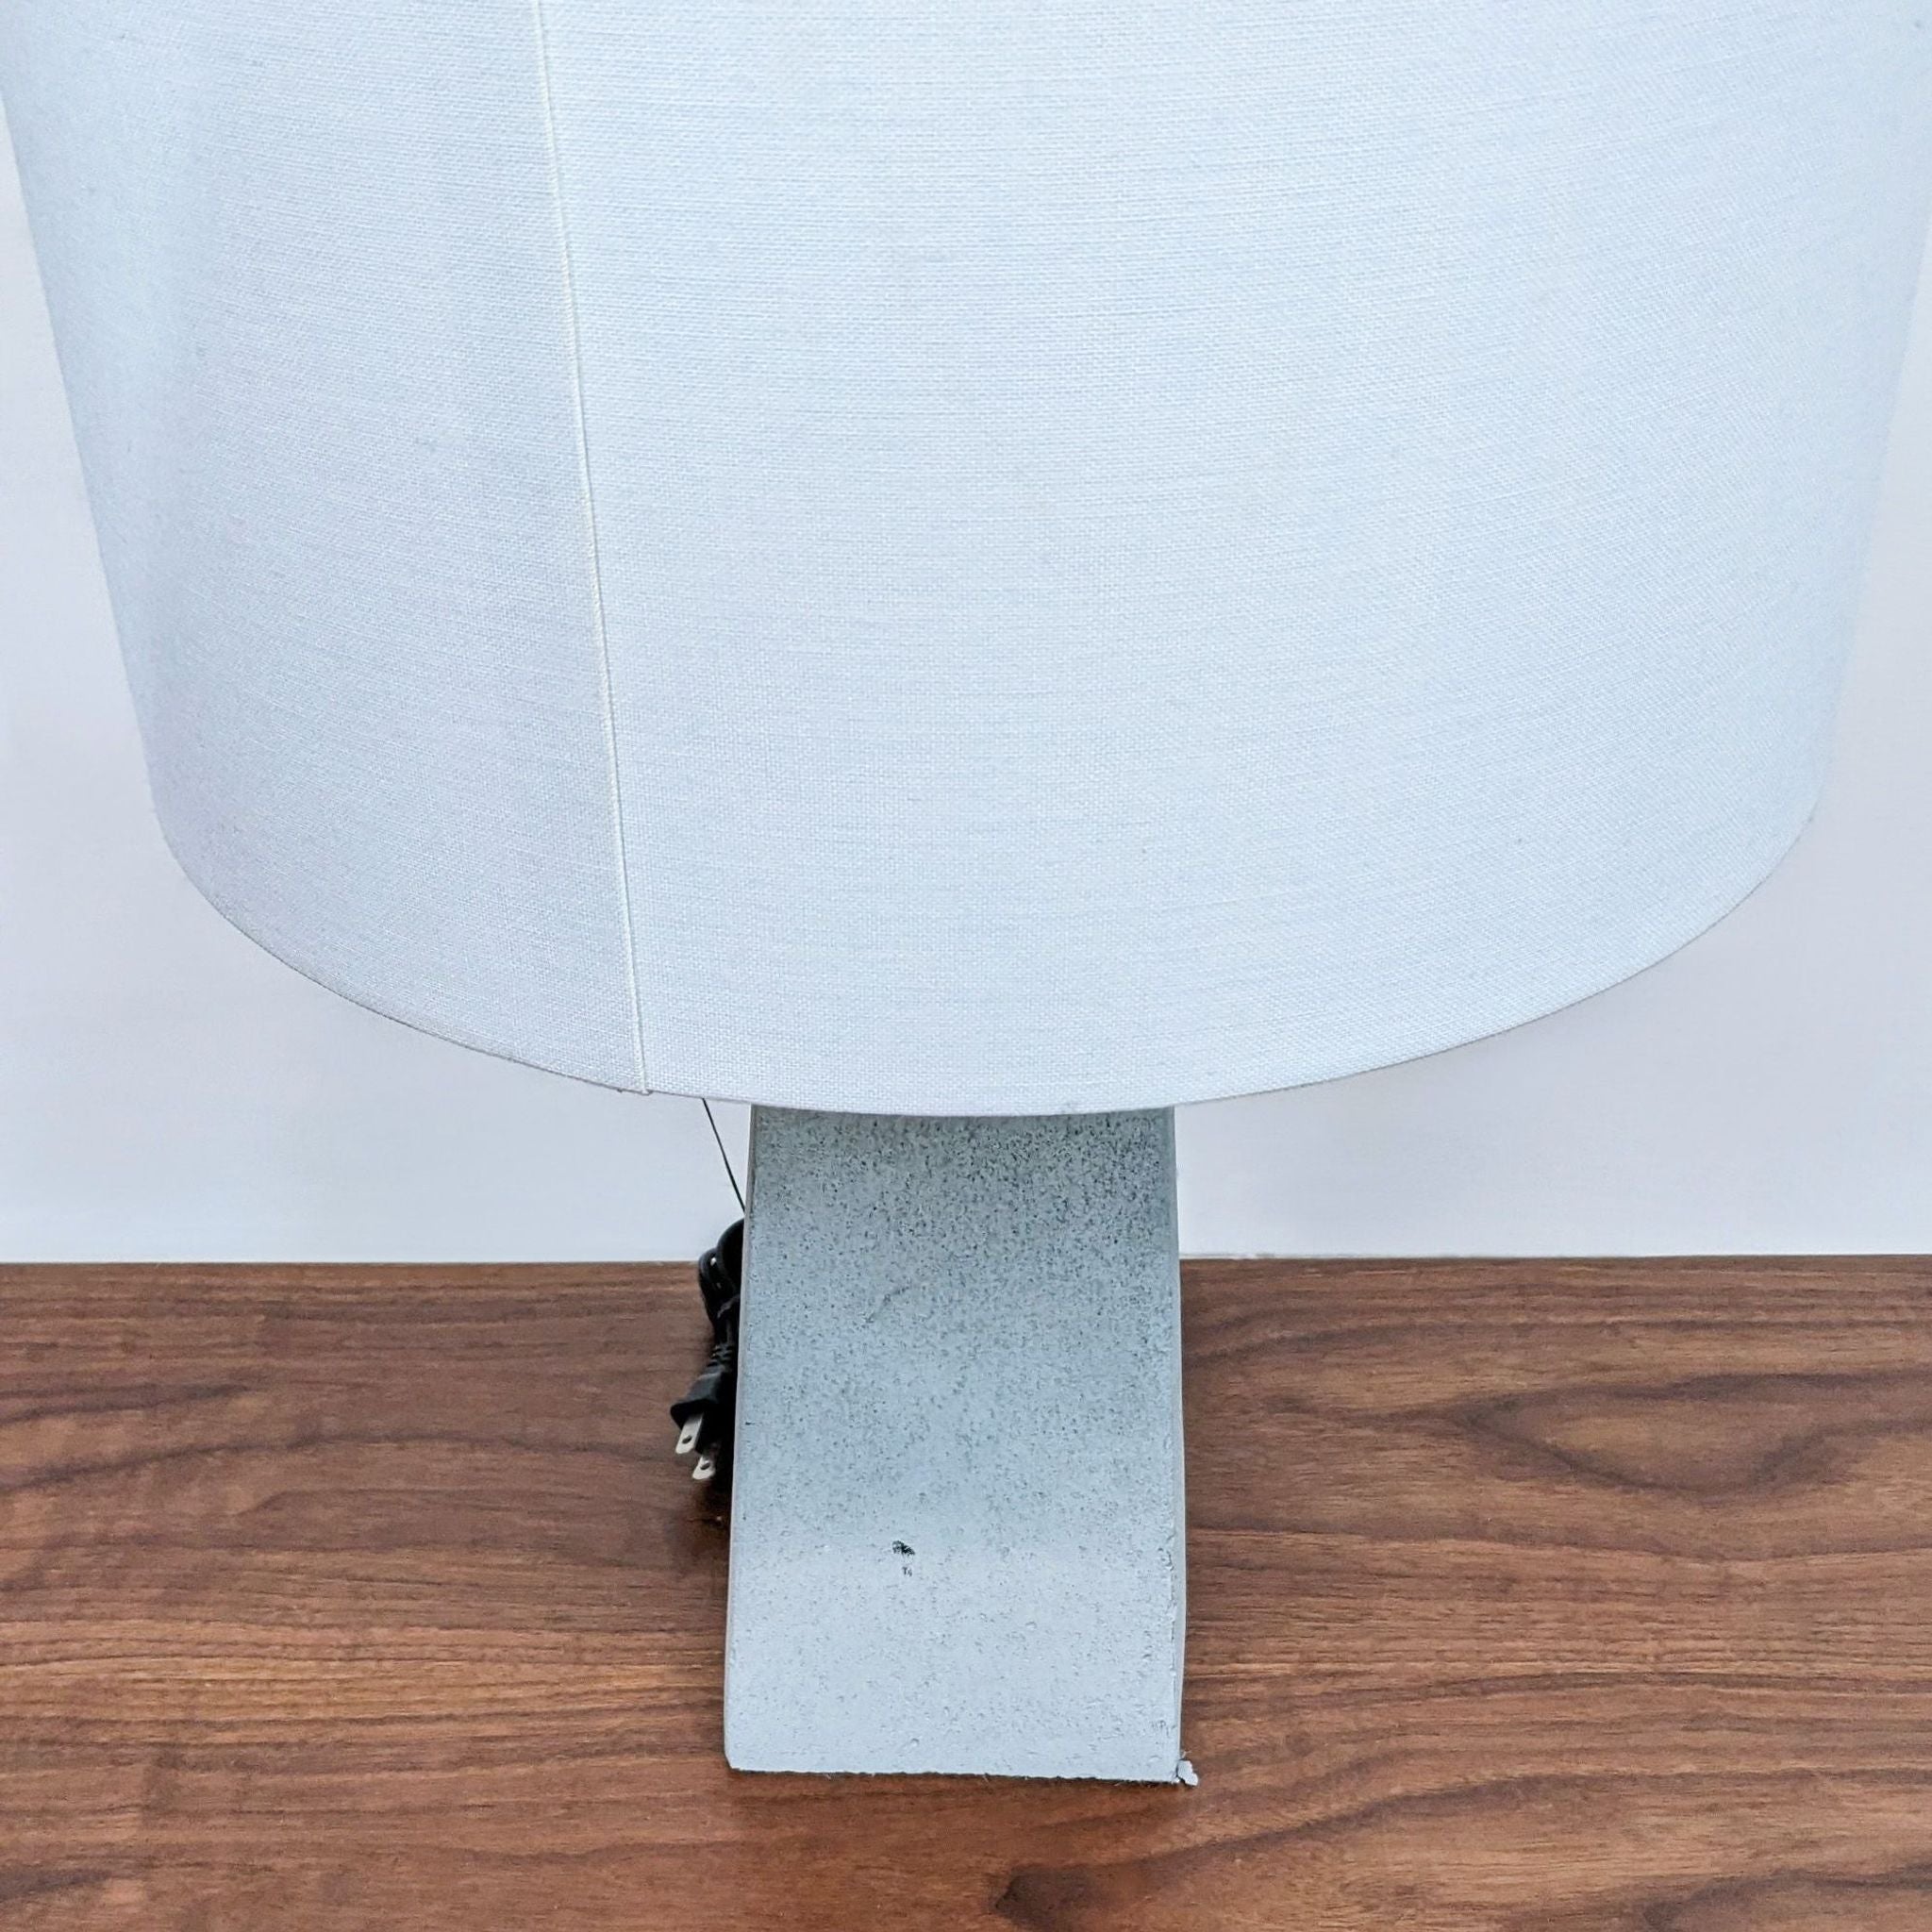 White fabric lampshade on a textured grey concrete base by Reperch, displayed on a wooden surface.